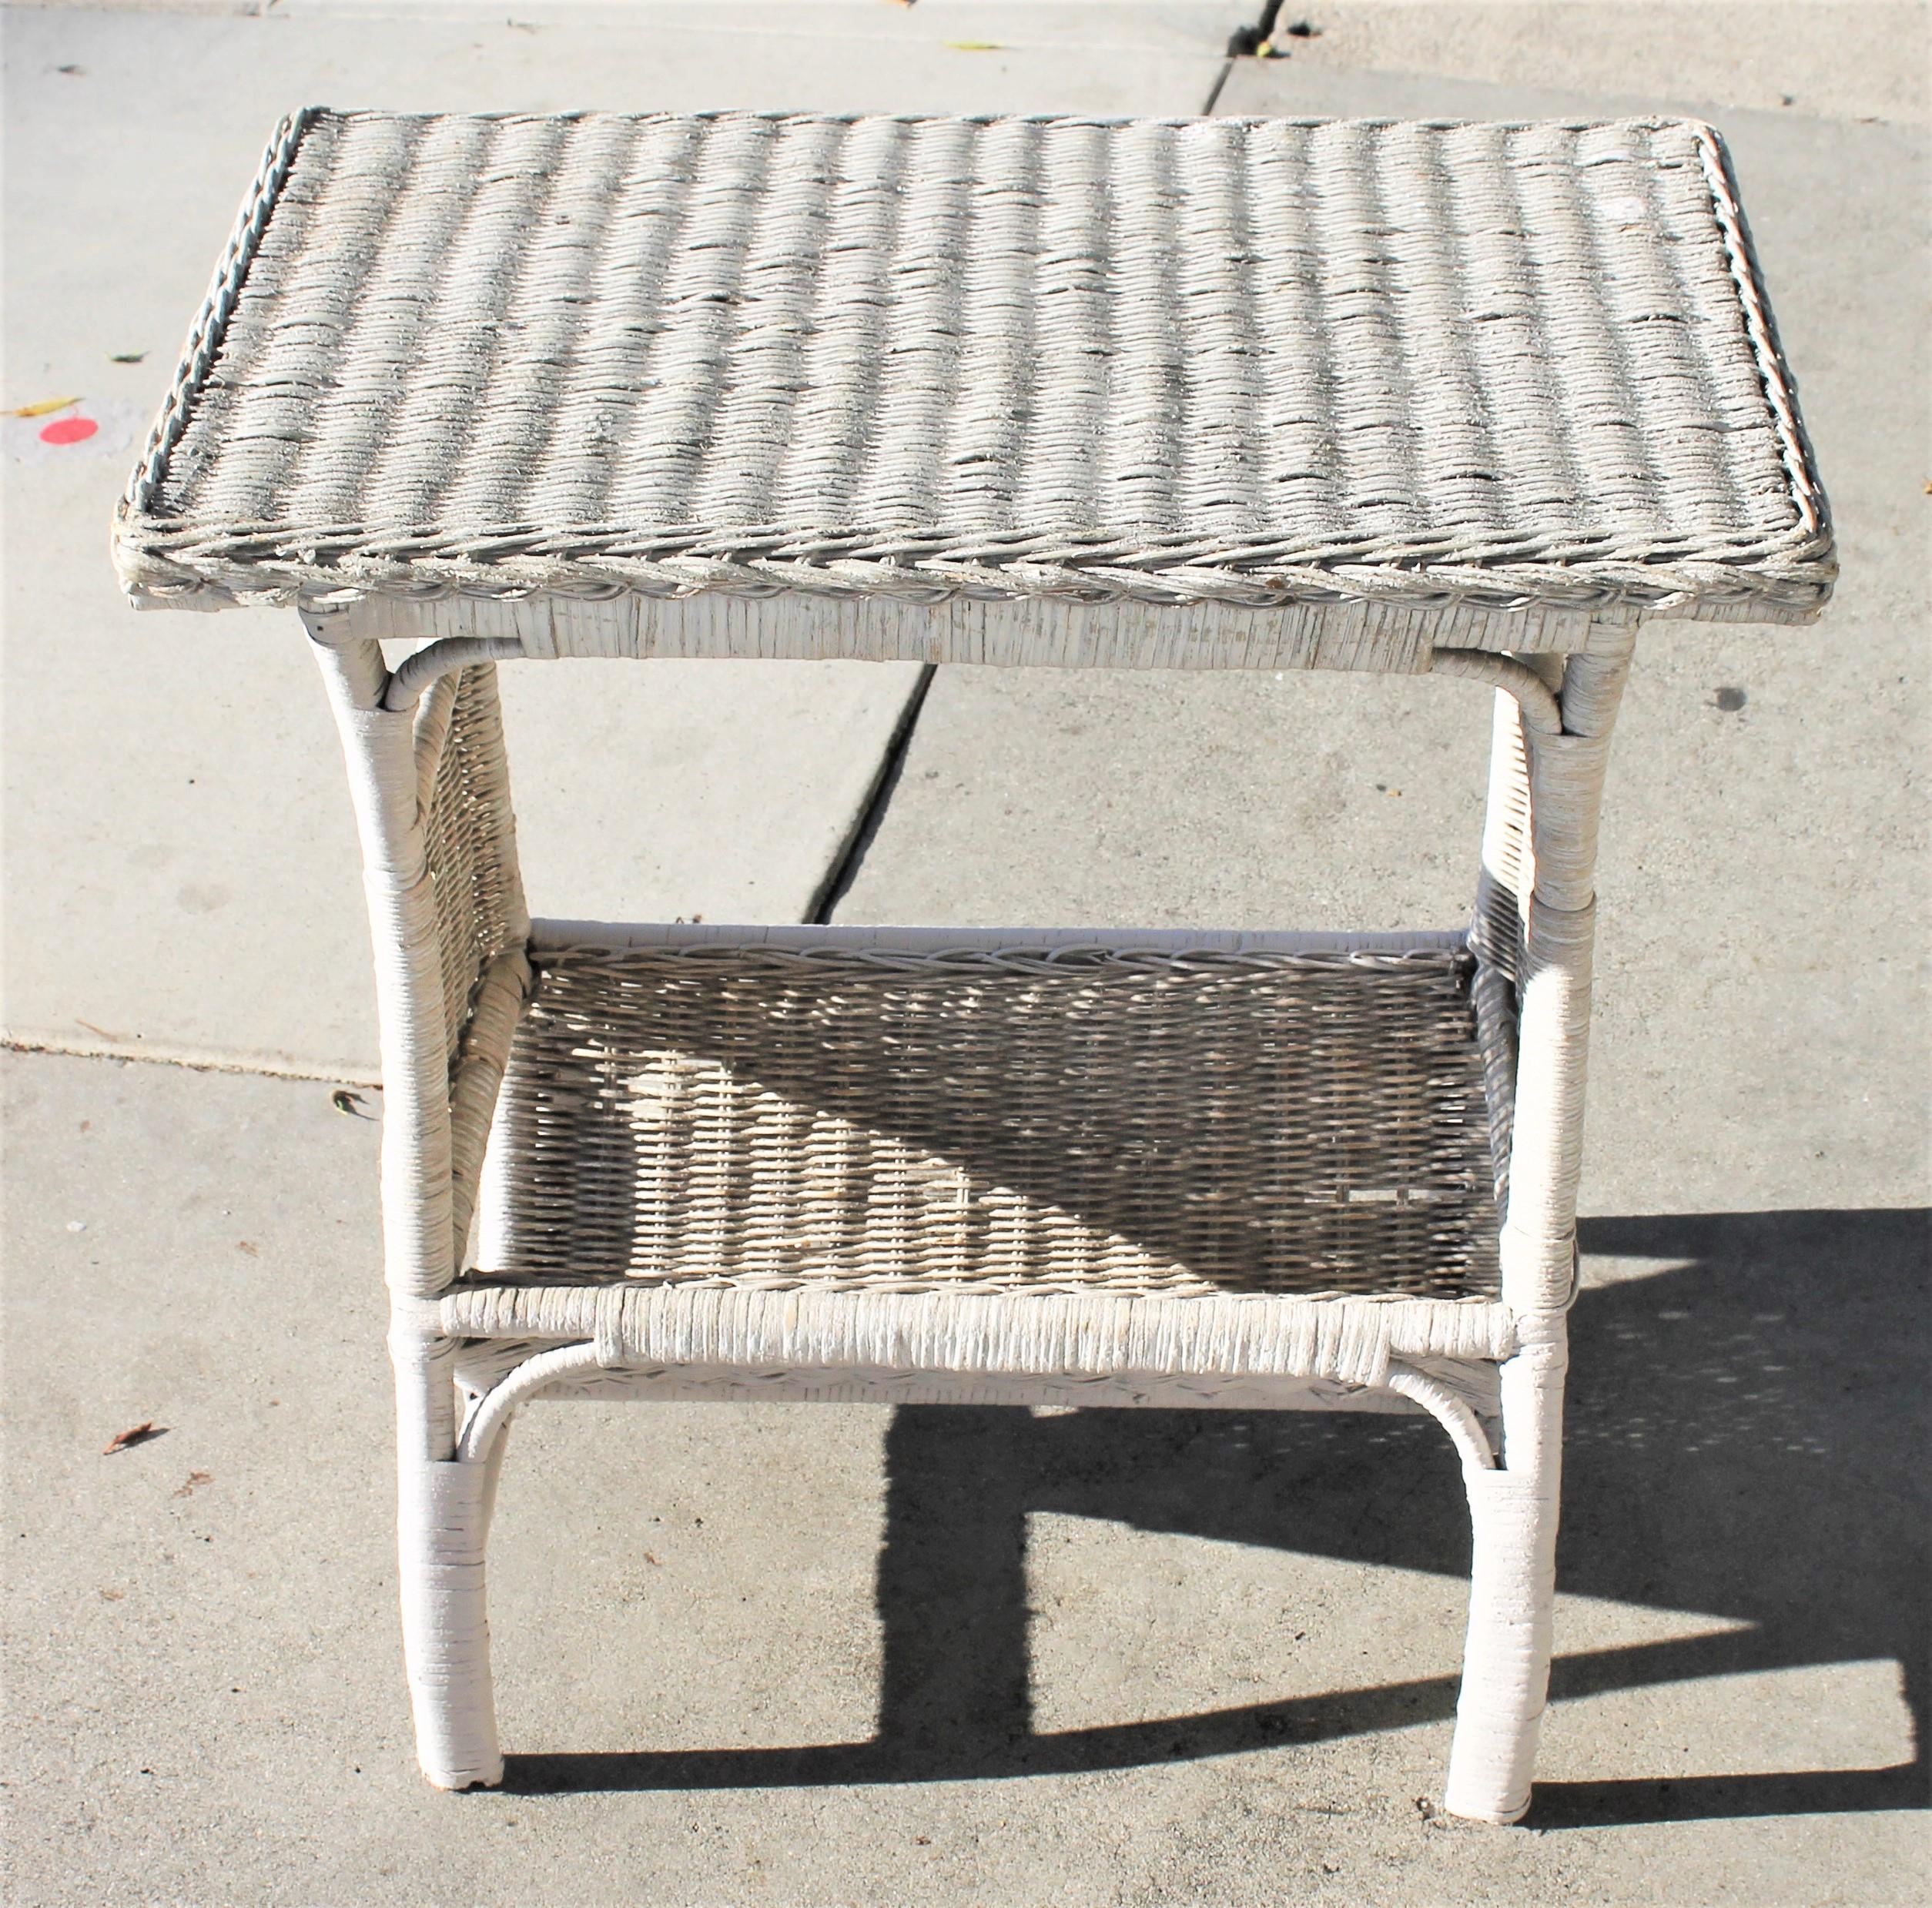 American Wicker Side Table in Original White Painted Surface